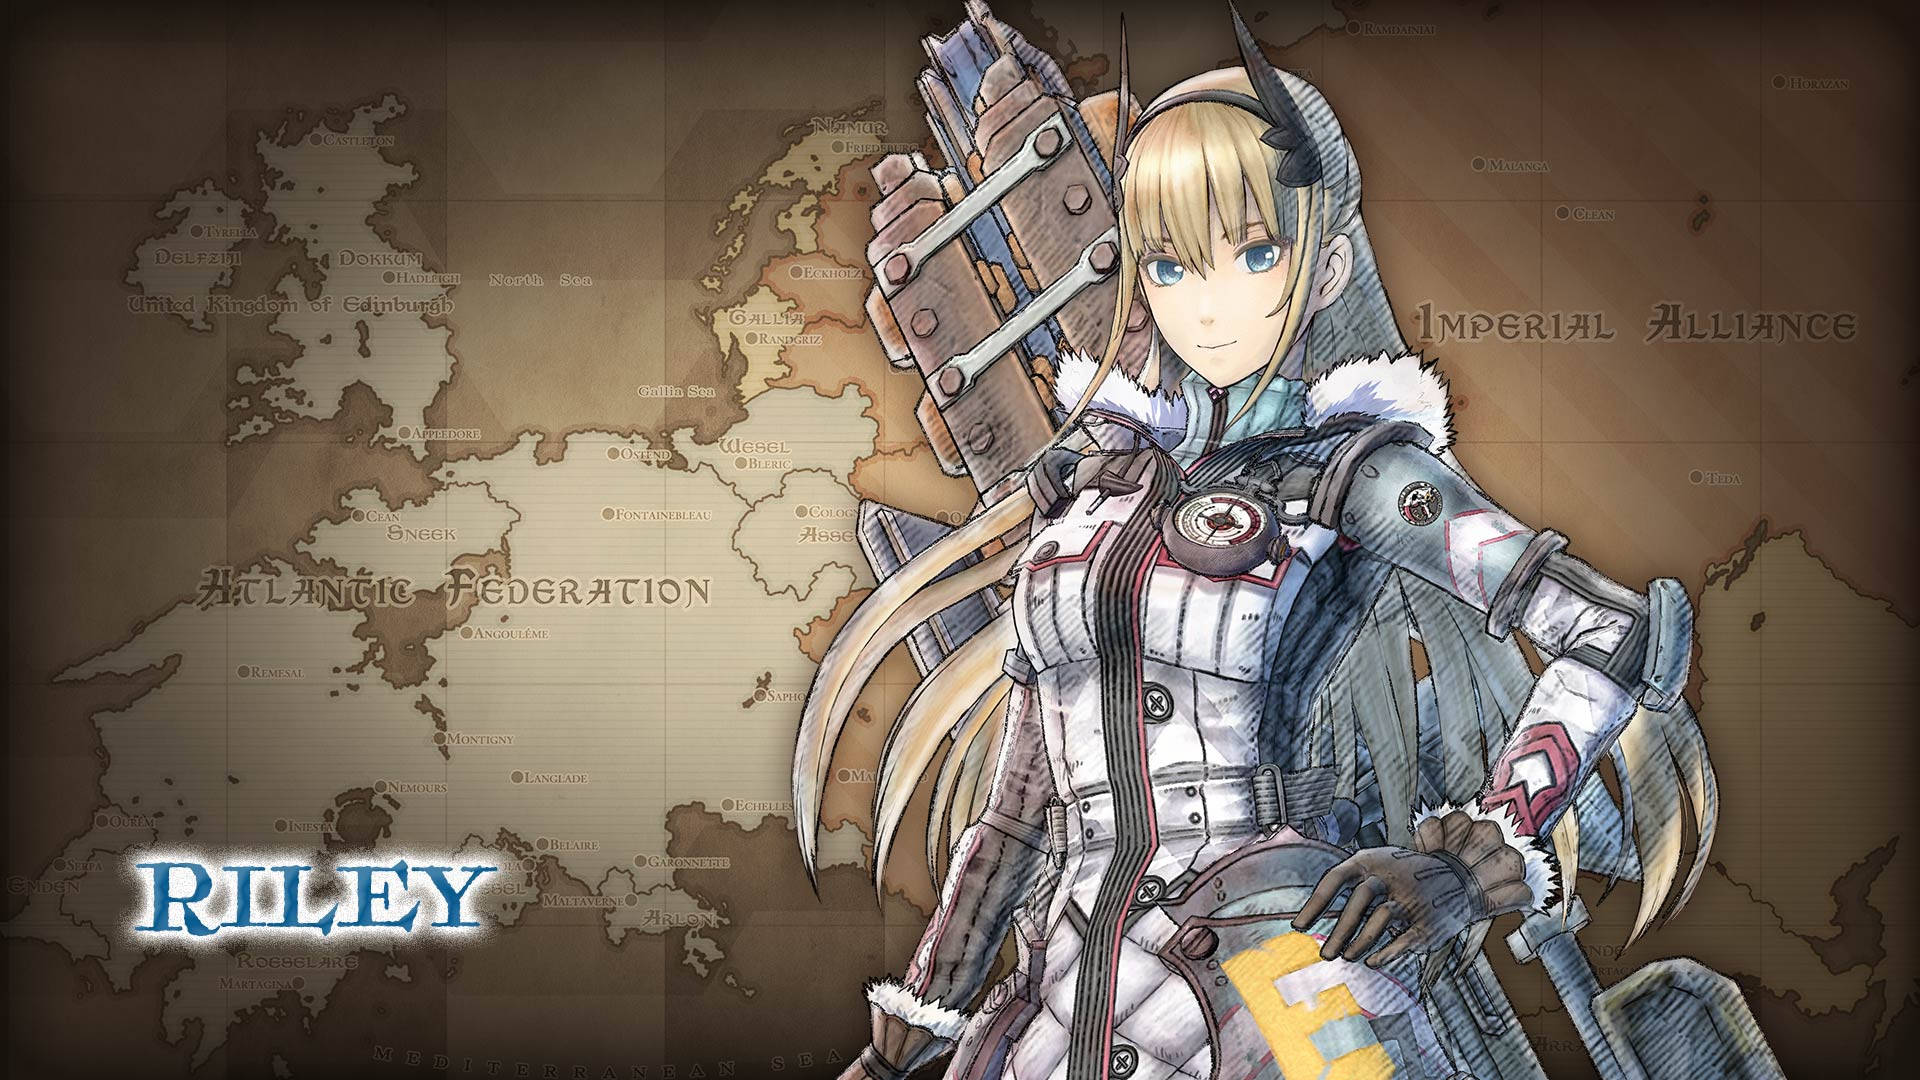 Valkyria Chronicles Wallpapers